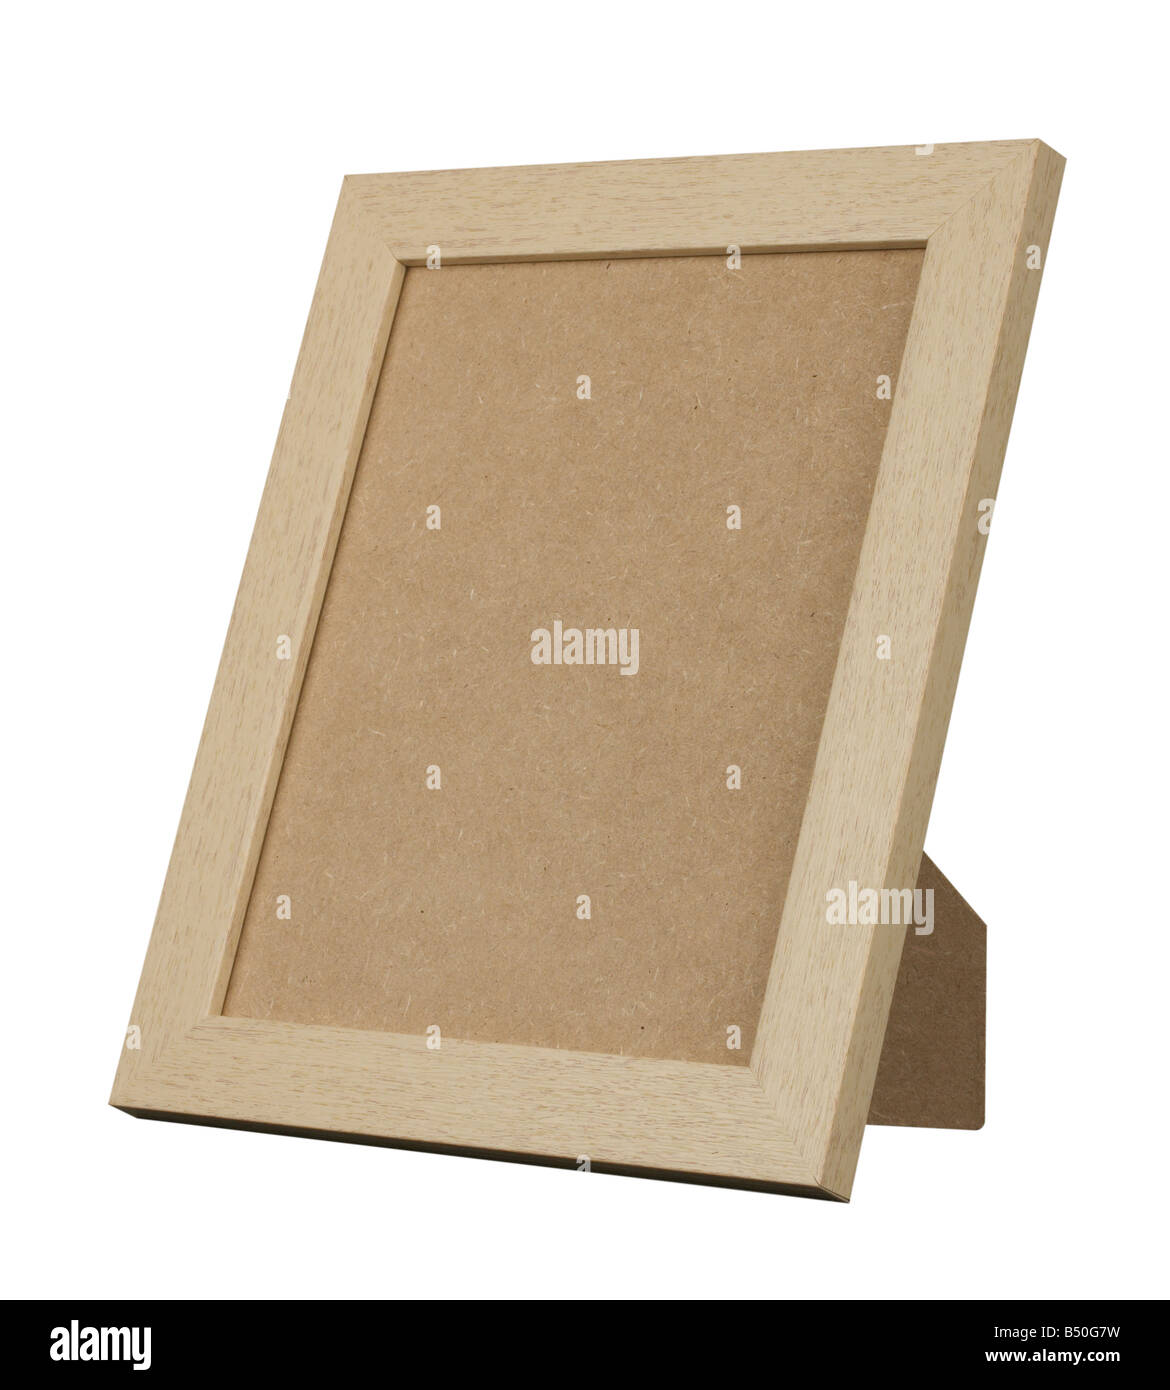 PICTURE FRAME PALE WOOD STAND STANDING UPRIGHT Stock Photo